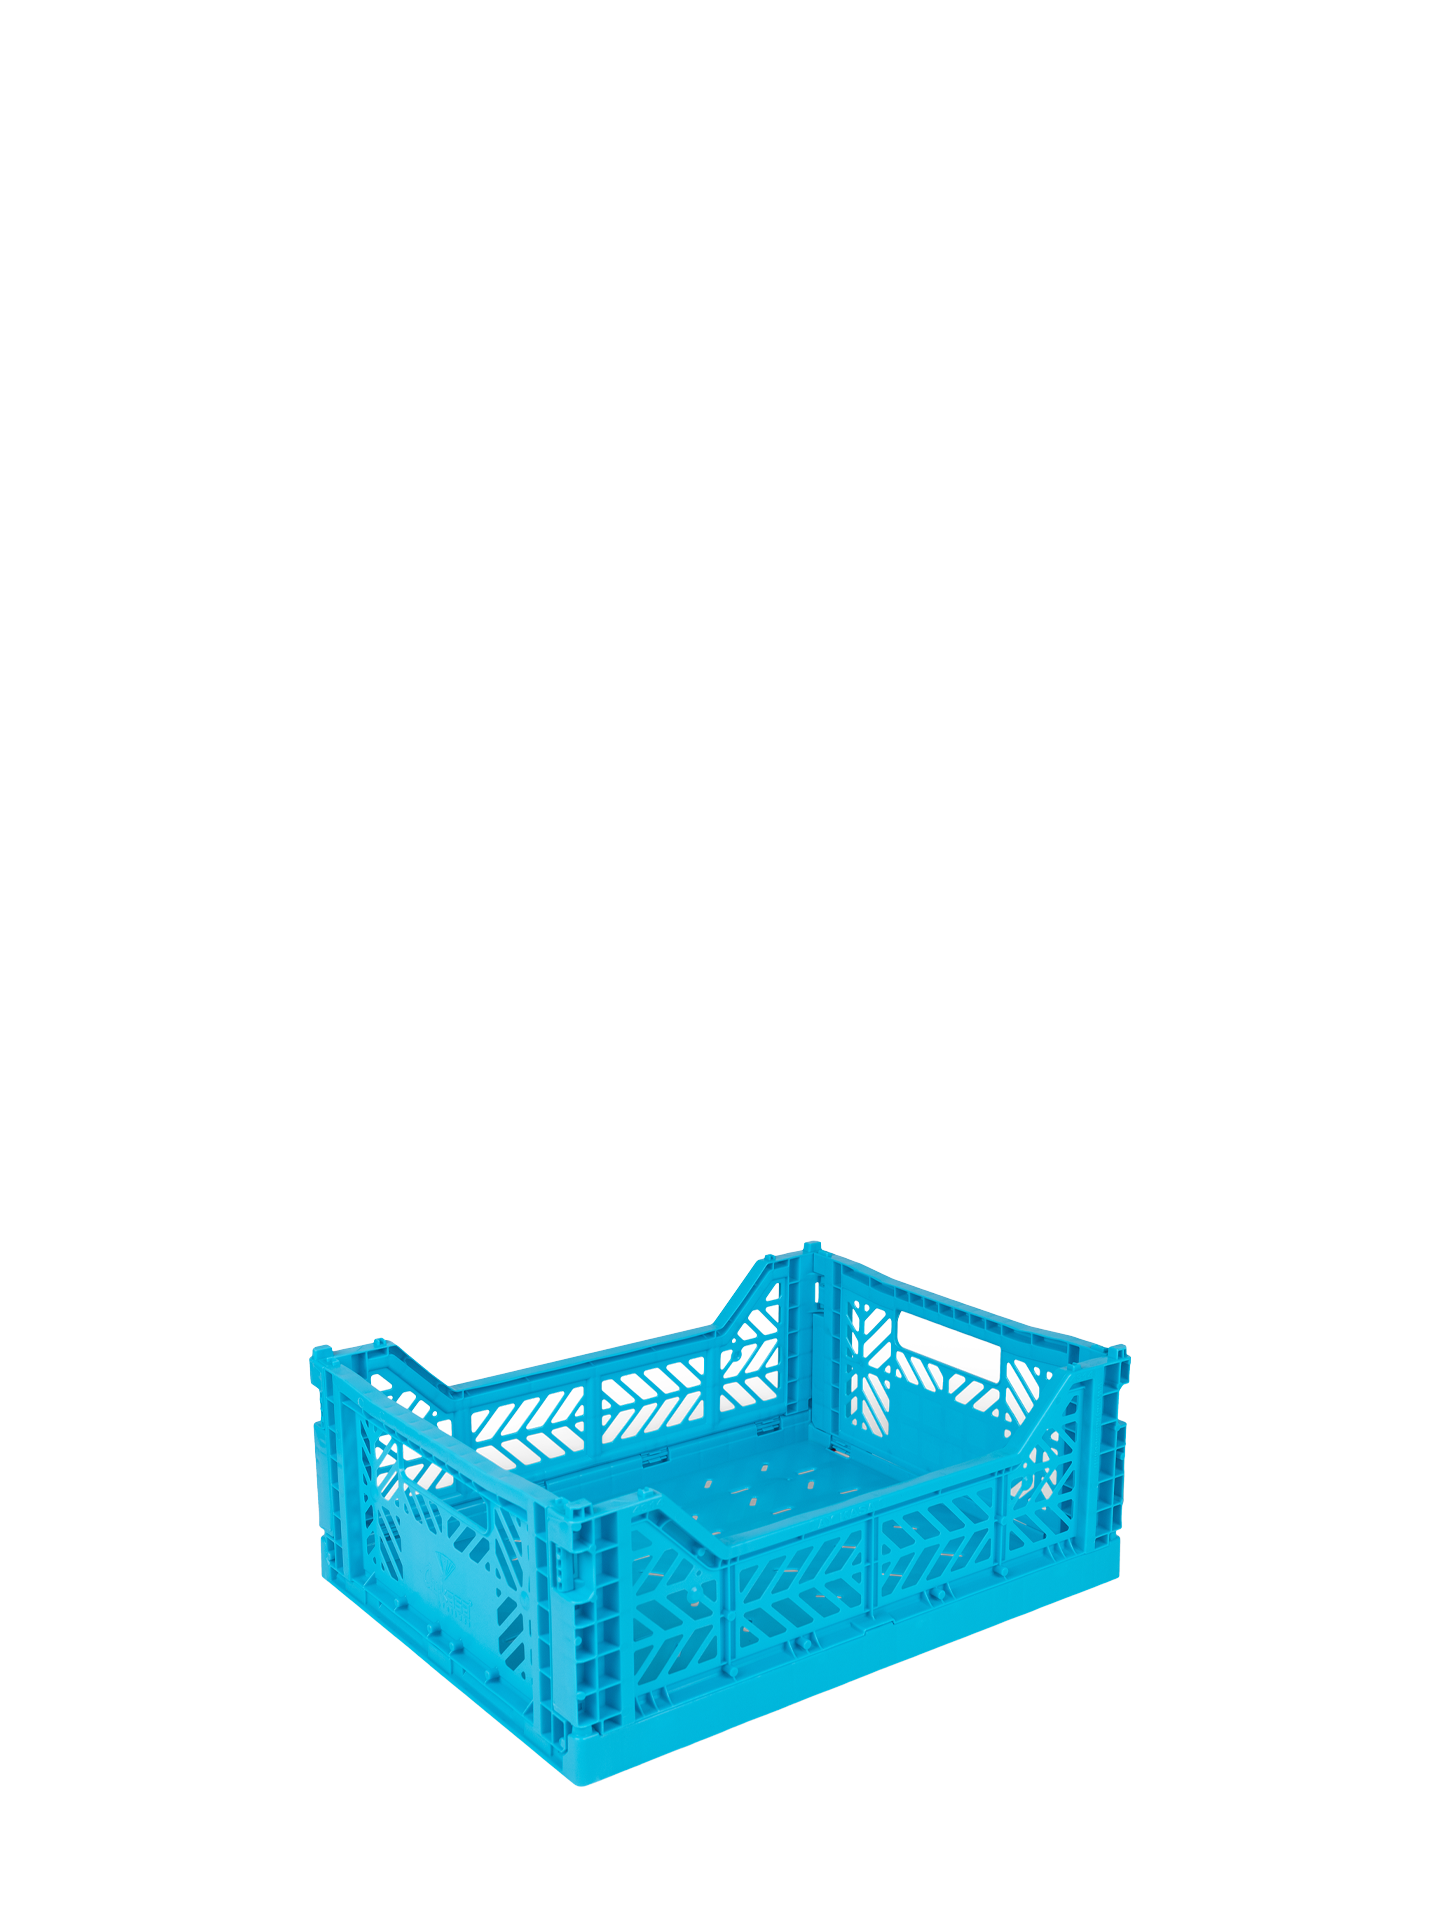 Easy to fold when not in use, the Aykasa medium size plastic storage crate in bright Turquoise can be stacked on top of each other and the colour range has a perfect hue for any room.